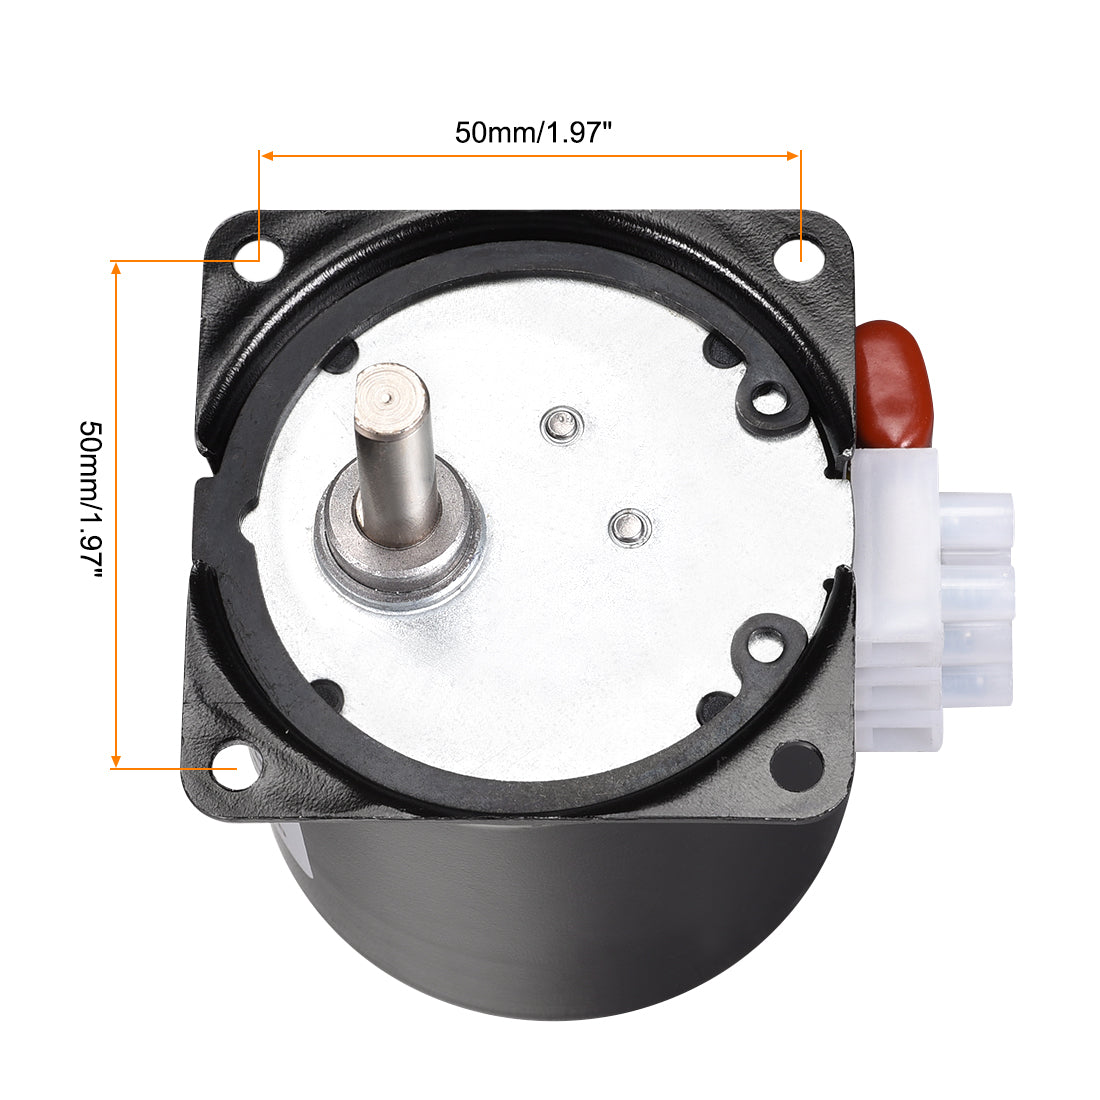 uxcell Uxcell AC 220V Electric Synchronous Motor Metal Gear Turntable /C 20RPM 50-60HZ 14W 8mm Dia Eccentric Shaft